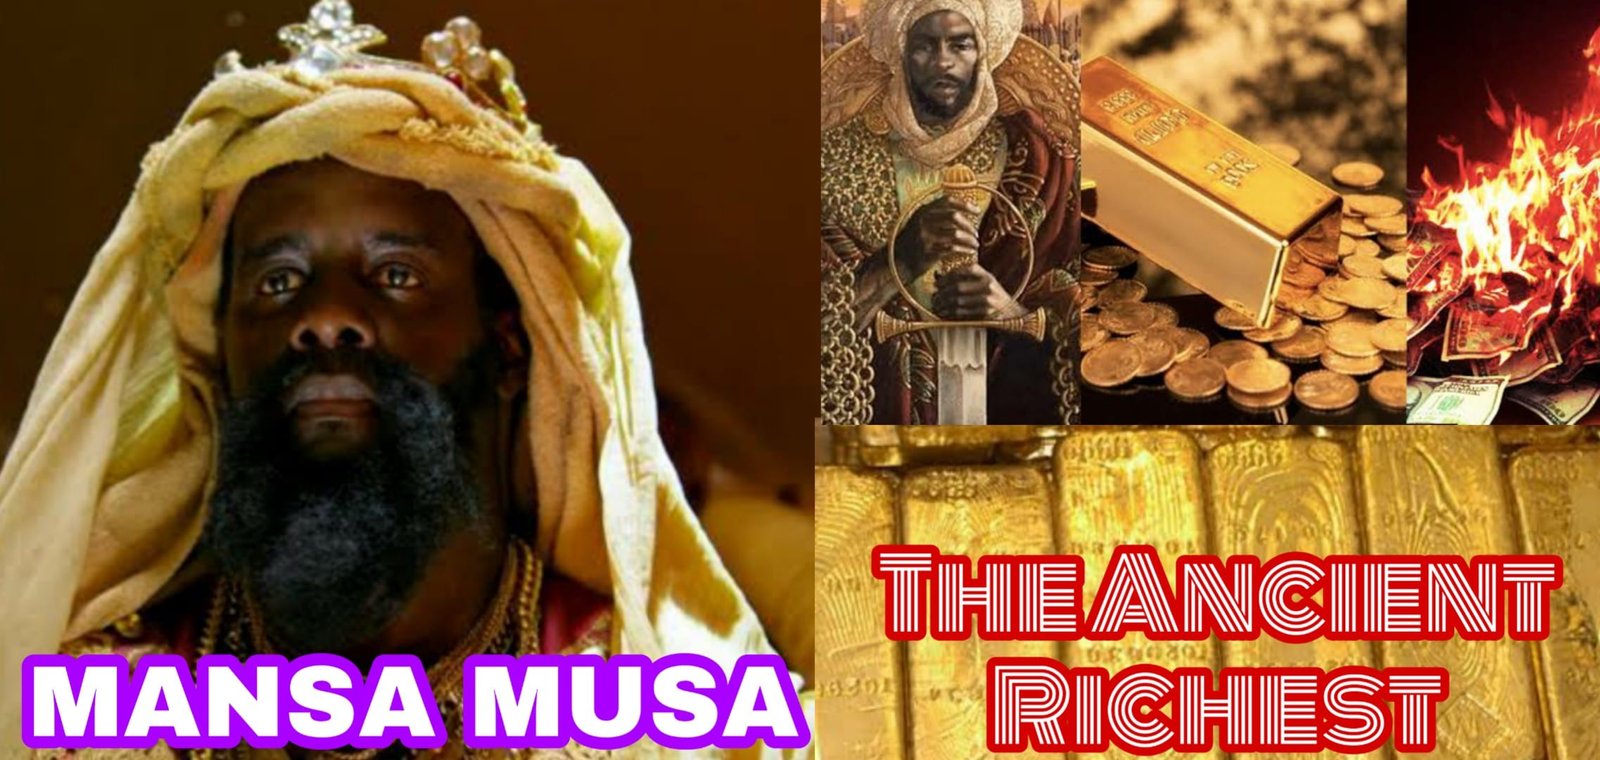 You are currently viewing Mansa Musa Net Worth: What is the Total Net worth of Mansa musa